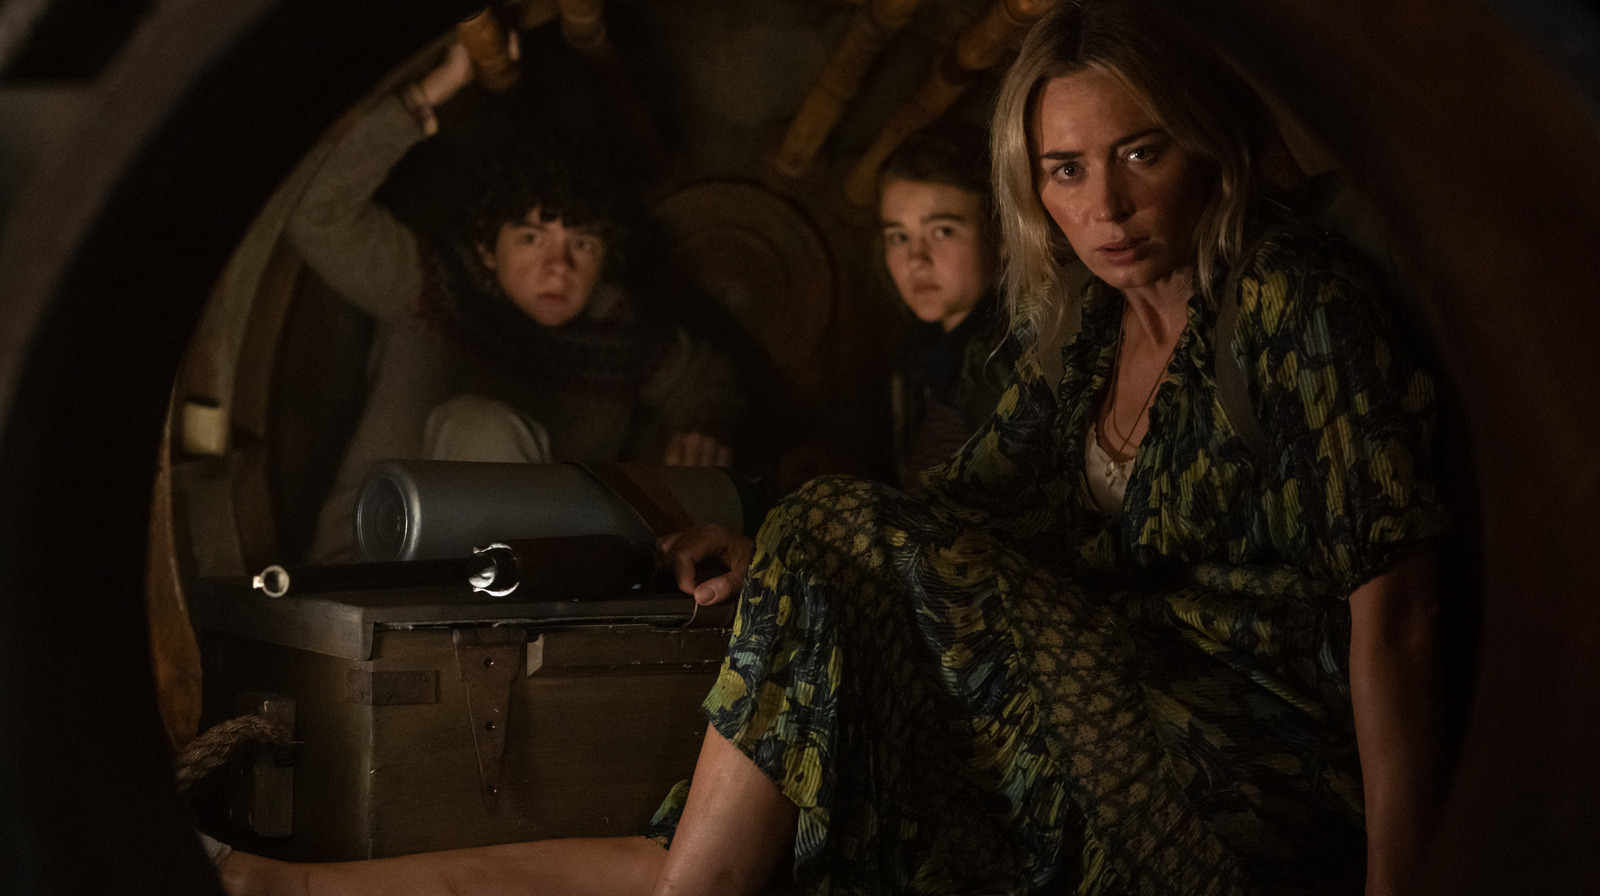 A Quiet Place: Day One Release Date, Cast, Plot & Everything You Need to Know